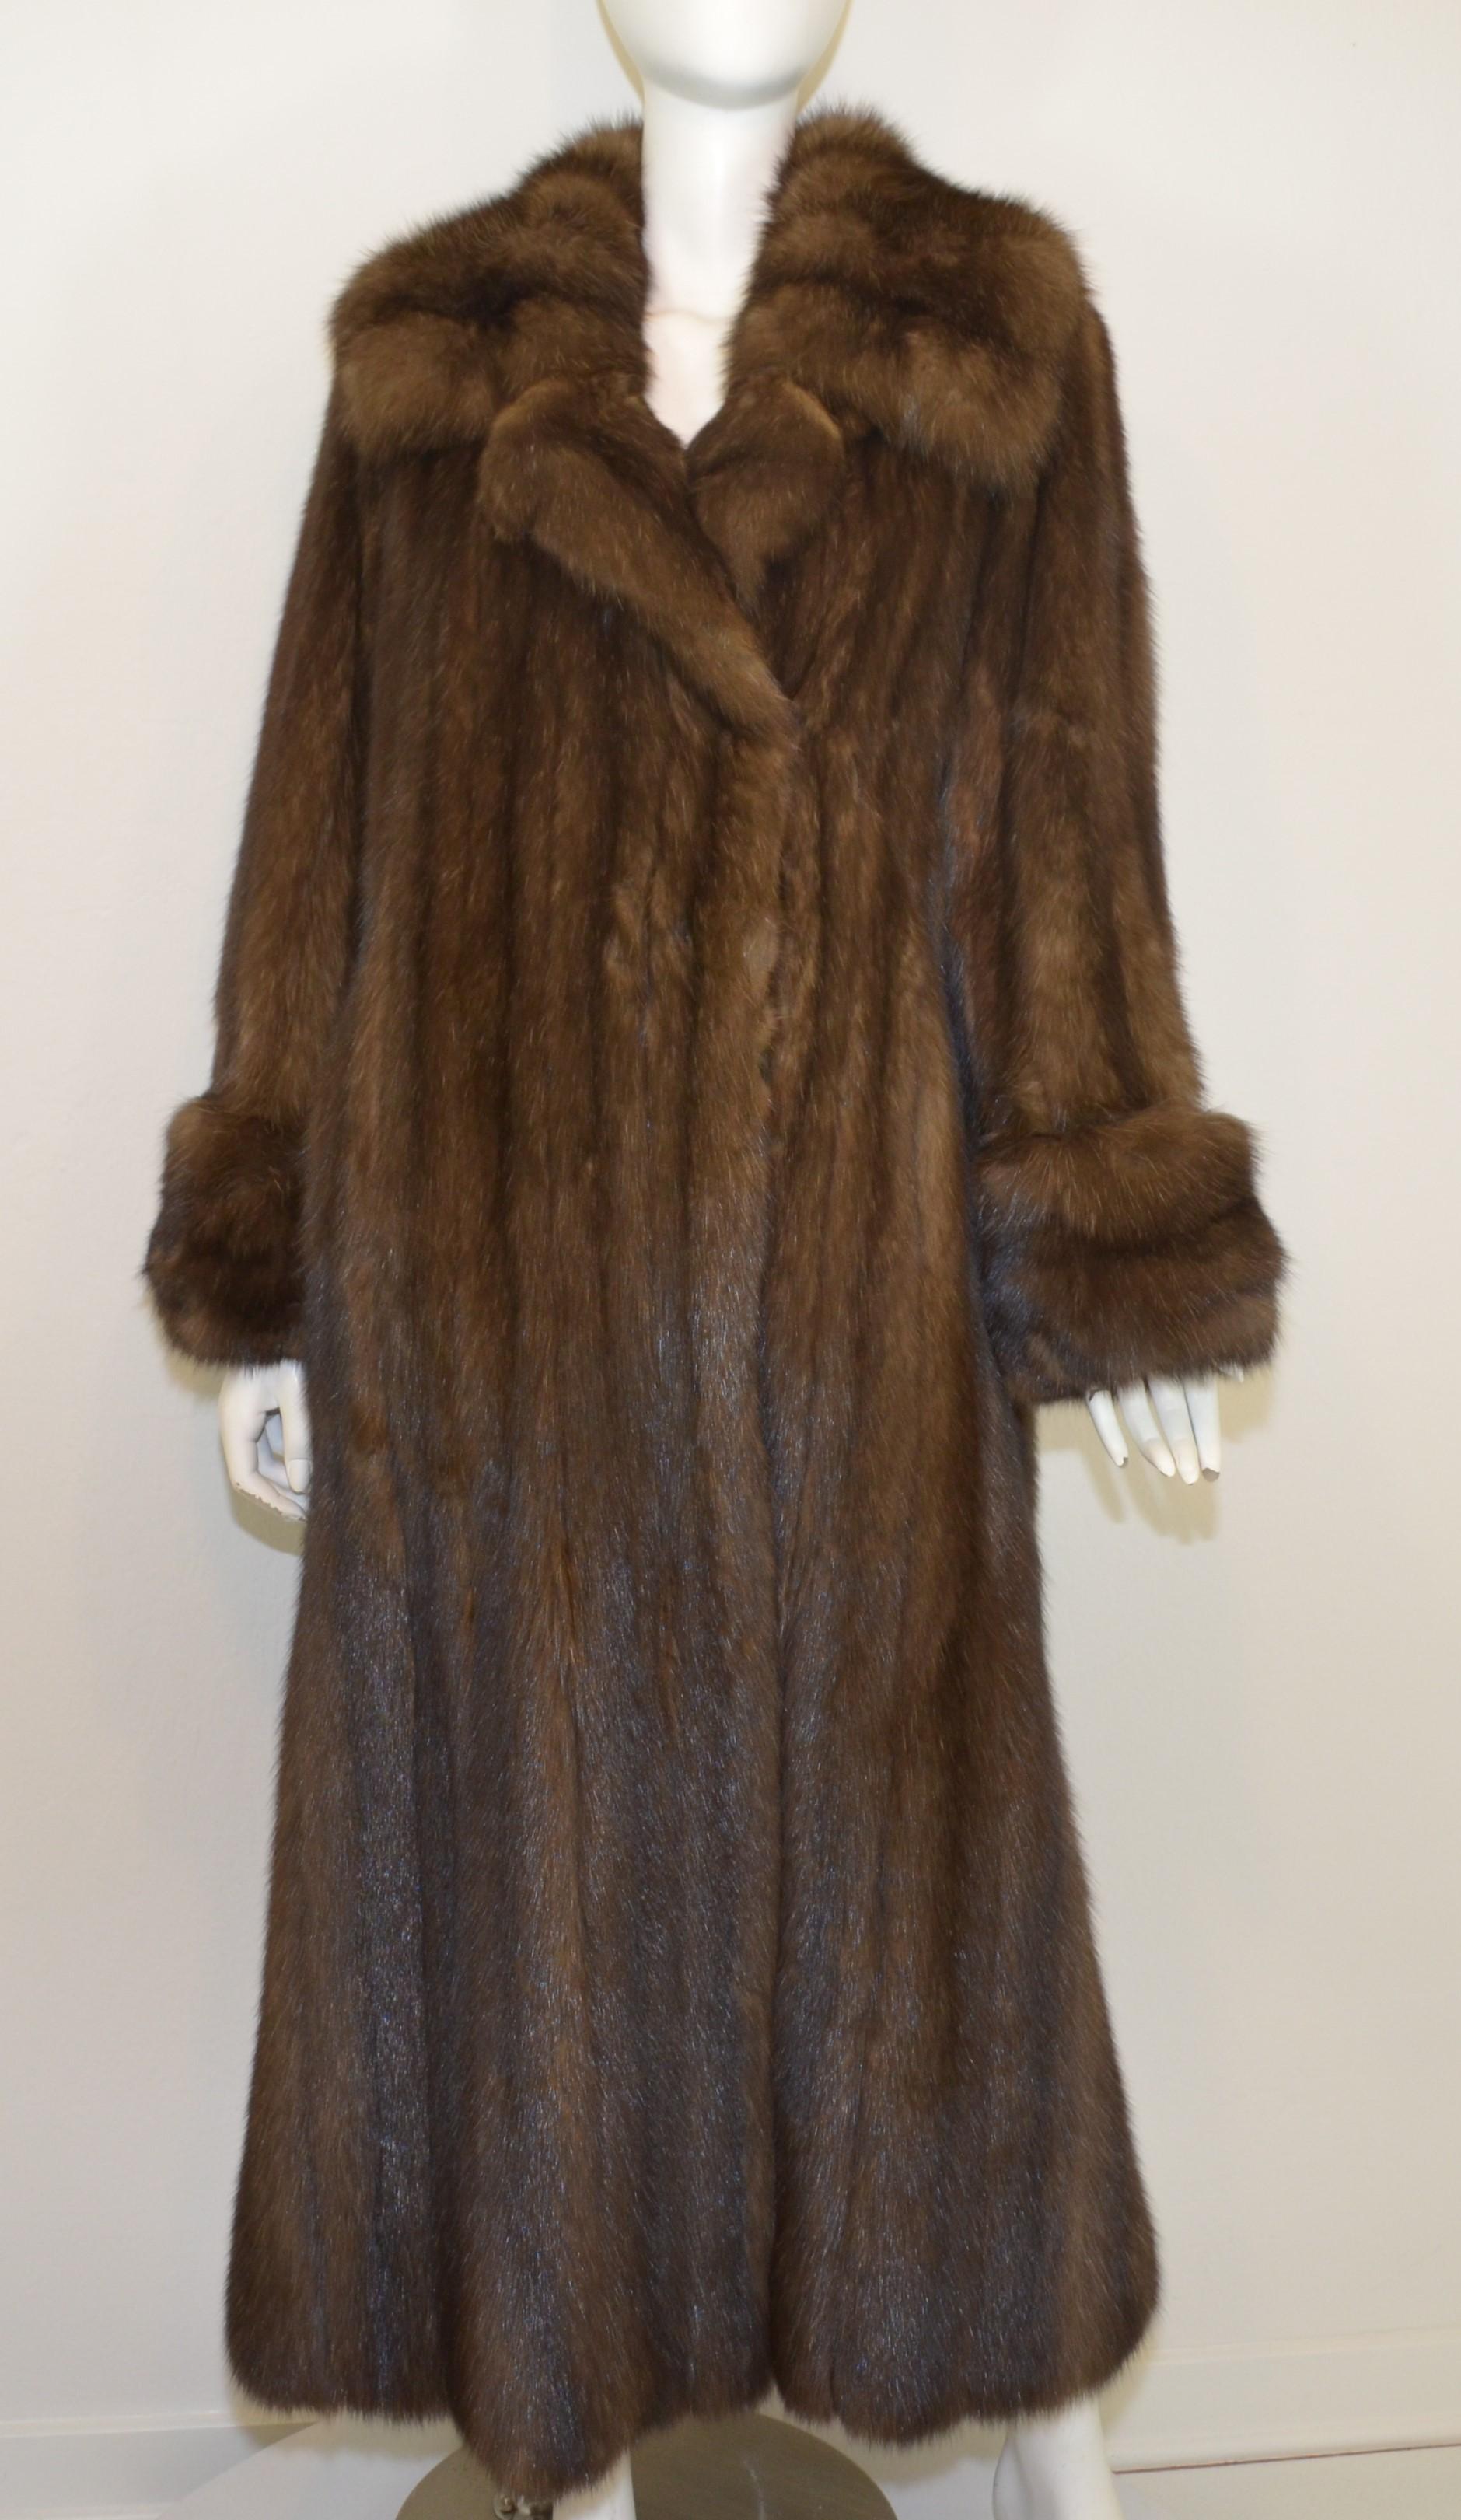 Dennis Basso sable fur coat -- Fully lined, pockets at the waist, and Two hook and eye fastenings.

Measurements:
bust 44”
waist 42”
sleeves 26”
length 55”